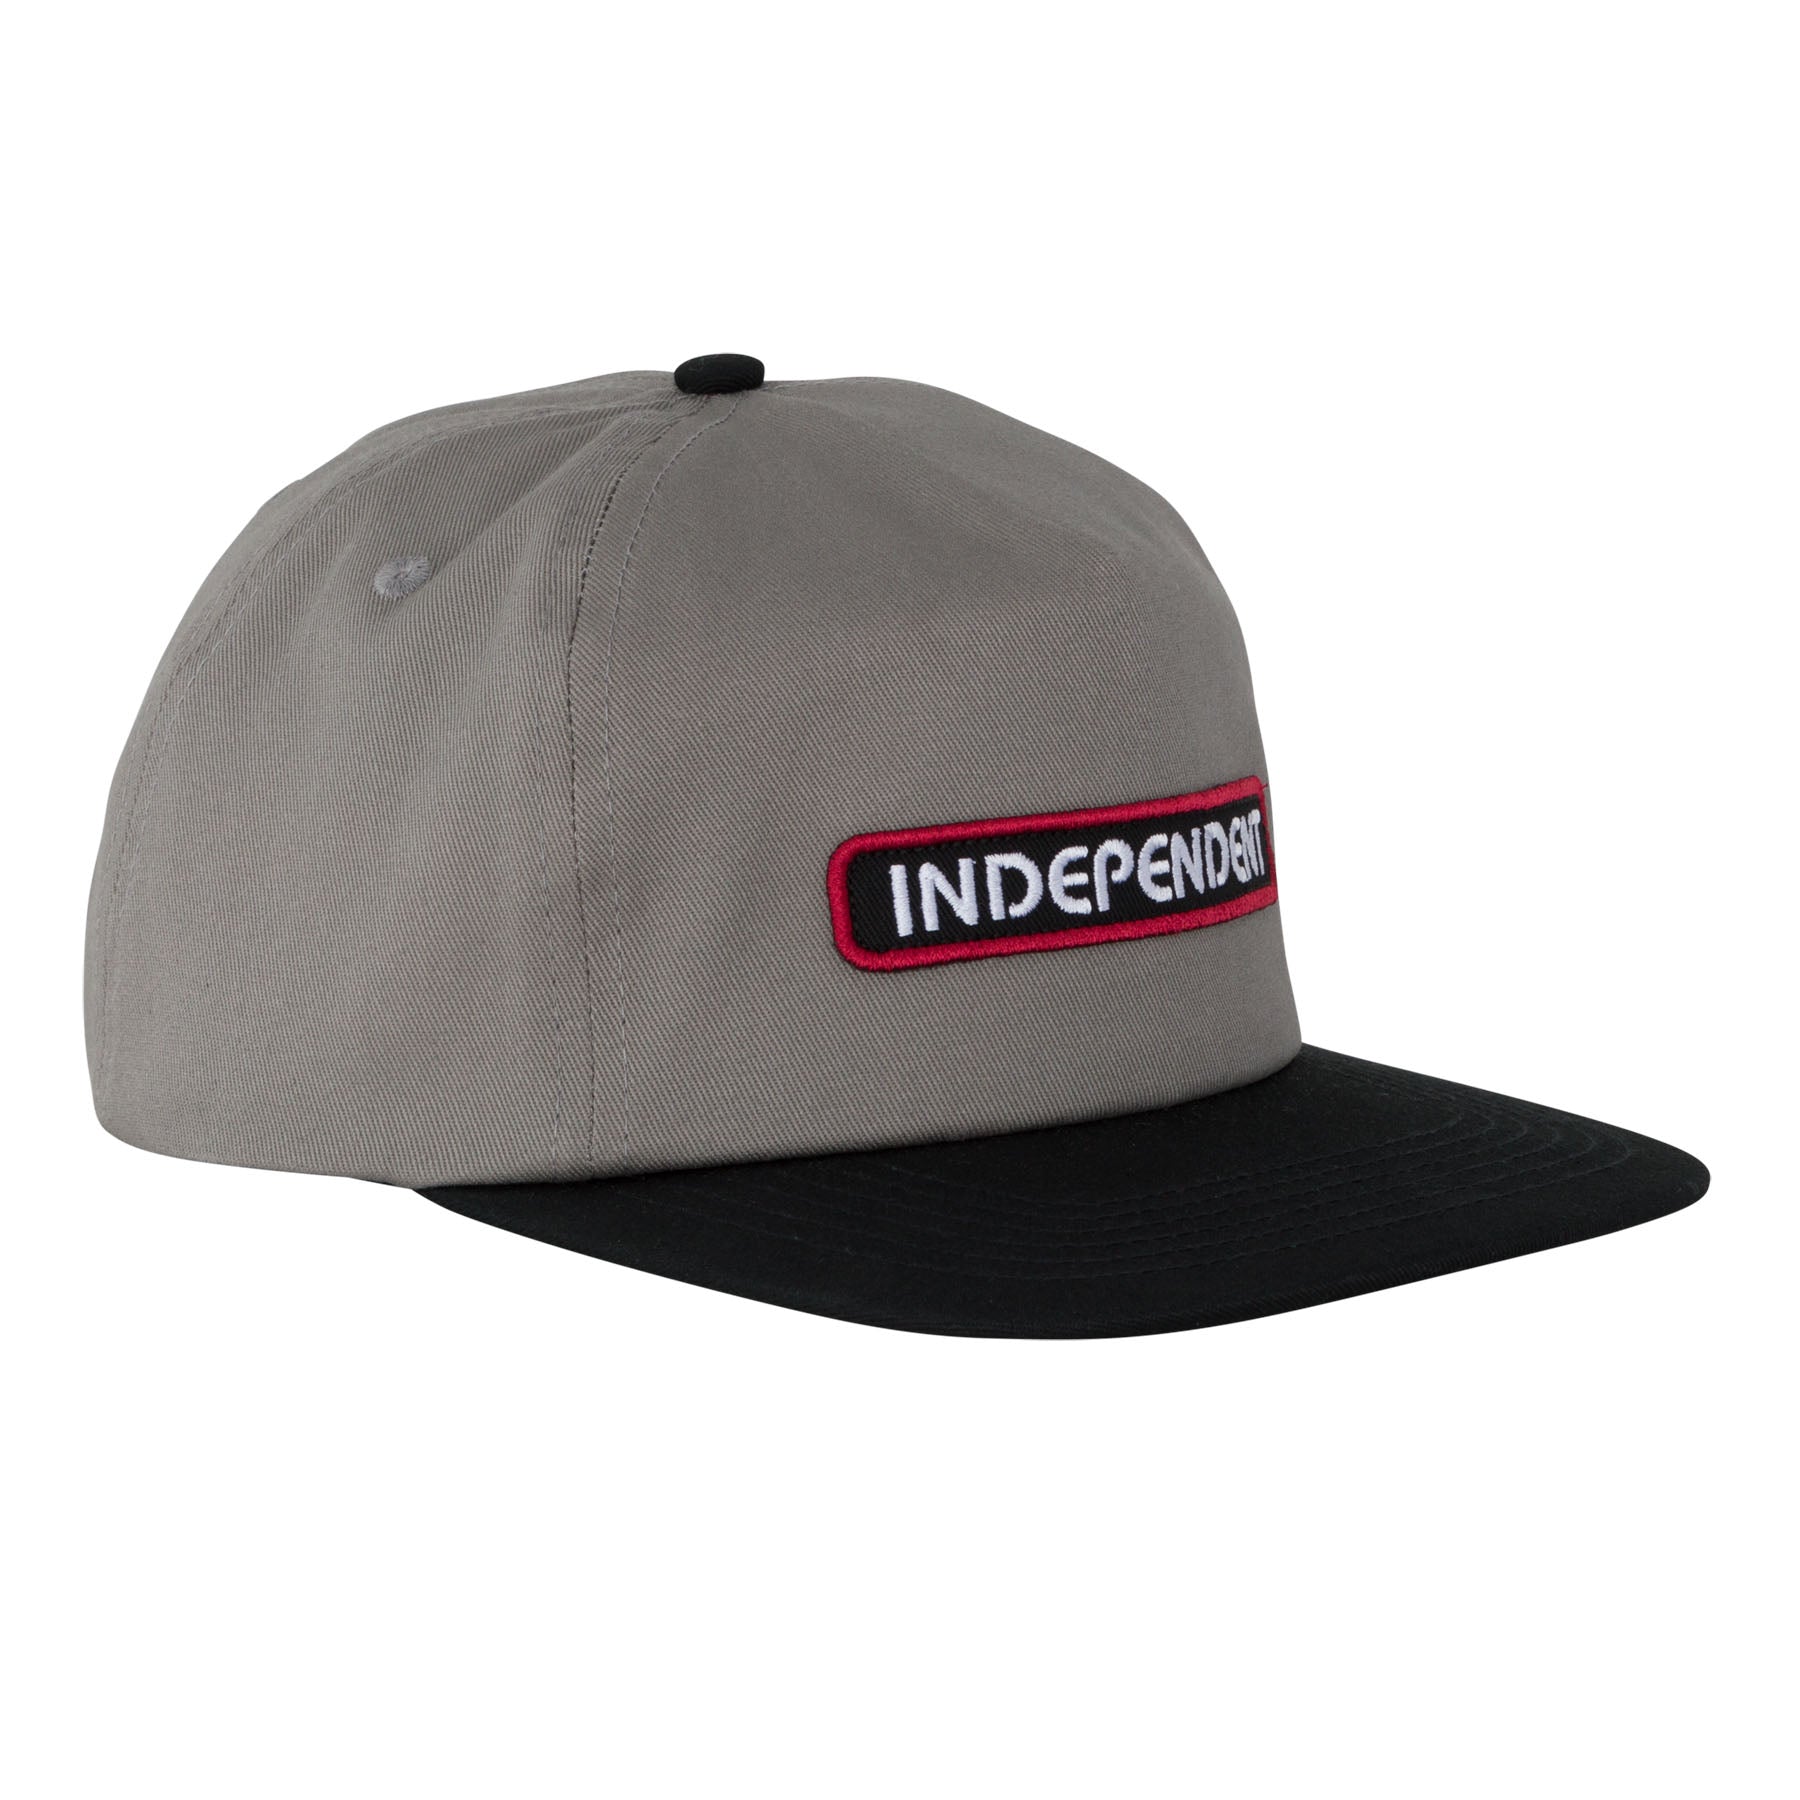 Independent B/C Groundwork Snapback Mid Profile Hat Gray/Black OS Unisex - Invisible Board Shop